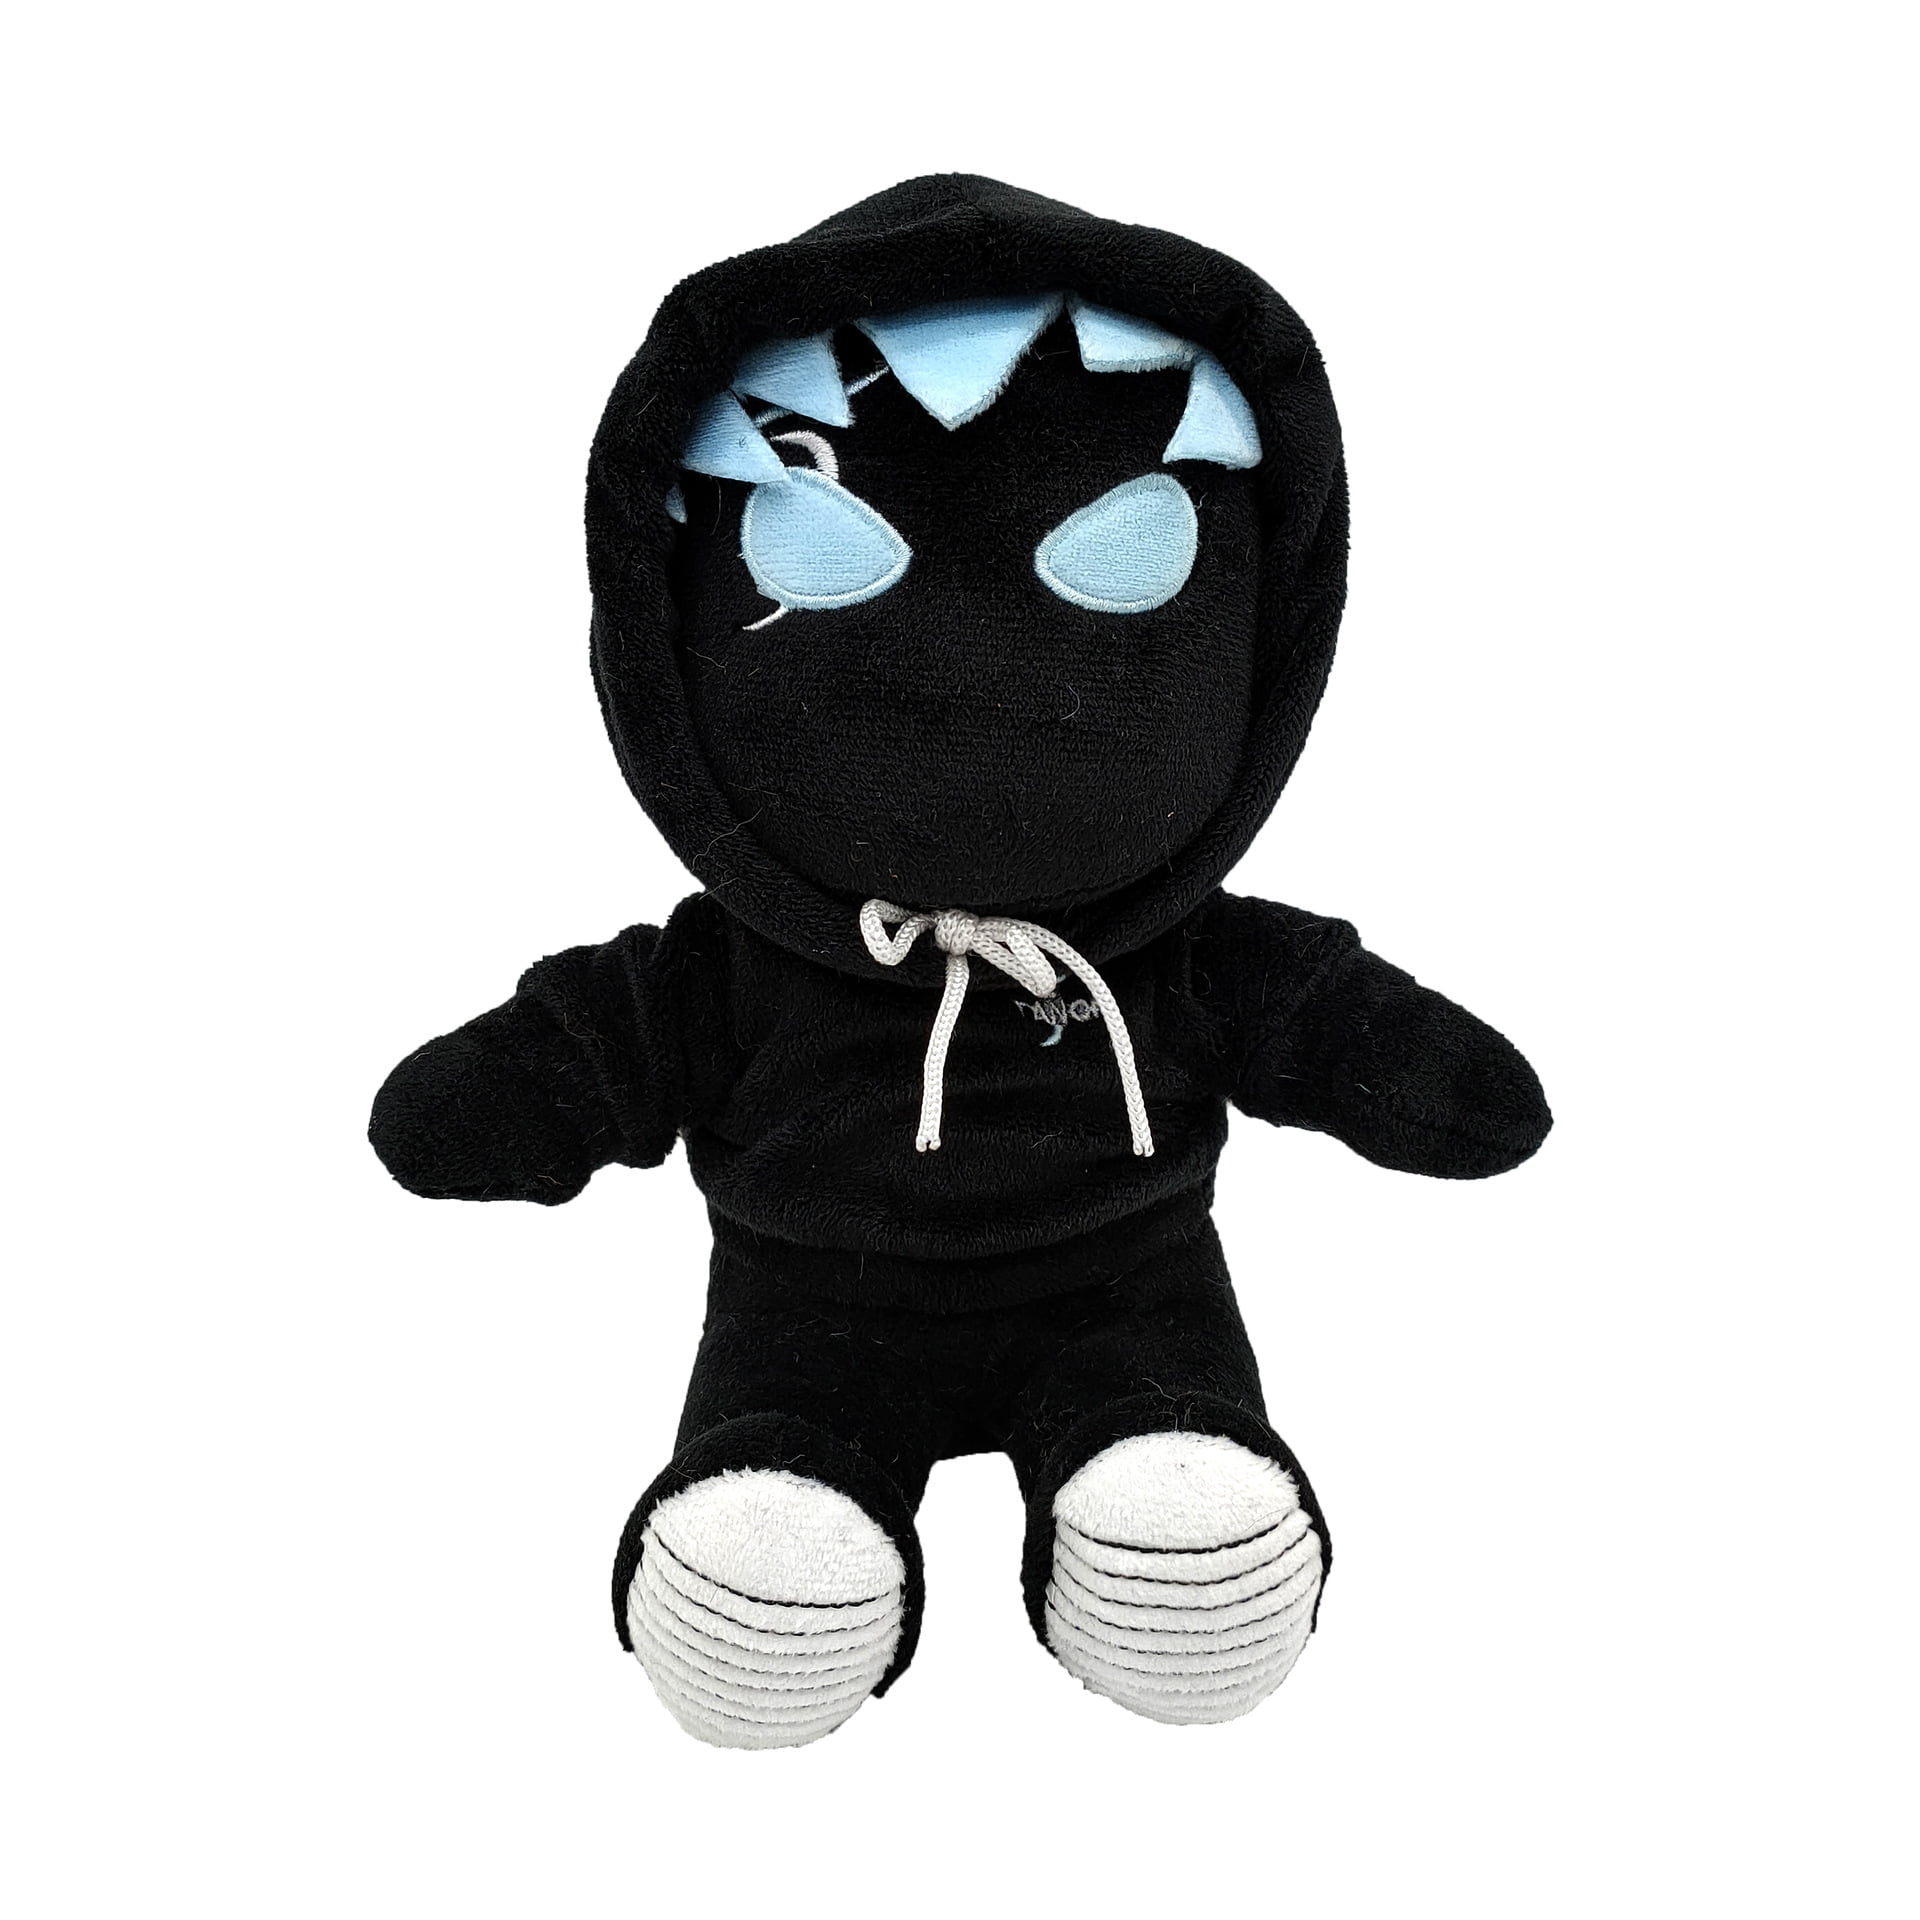 Tanqr Plush Anime Black Plush Toy Cartoon Characters Stuffed Animal Game  Plushie Doll for Fans and Friends Beautifully Plush 